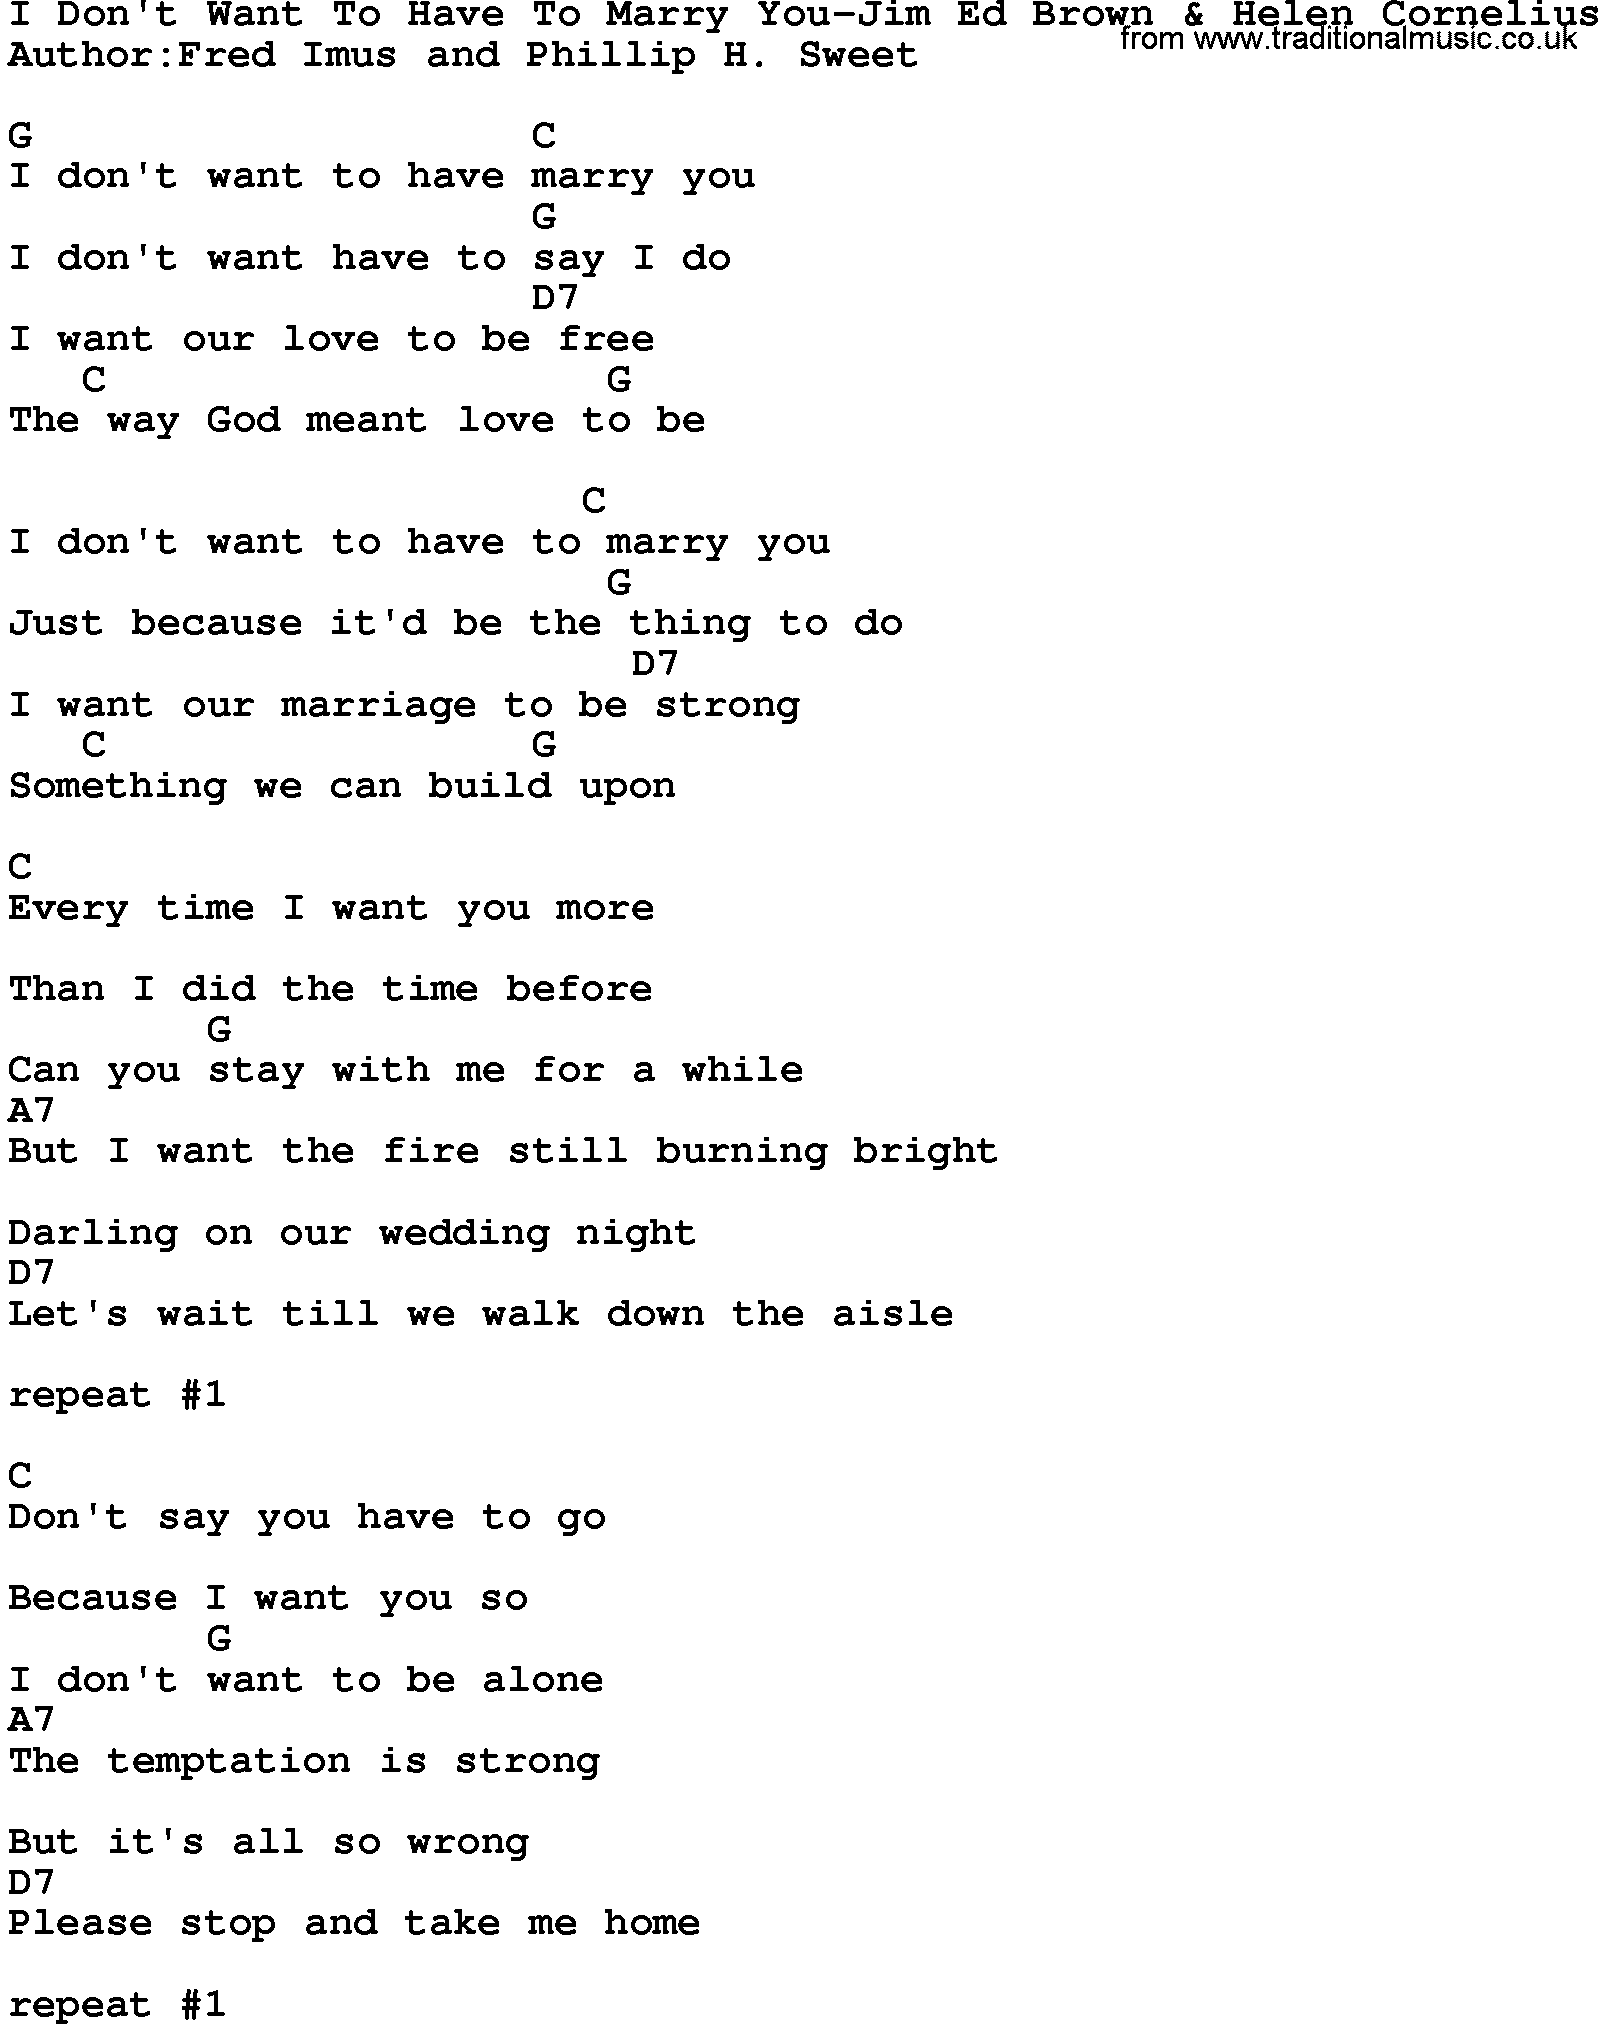 Country music song: I Don't Want To Have To Marry You-Jim Ed Brown & Helen Cornelius lyrics and chords